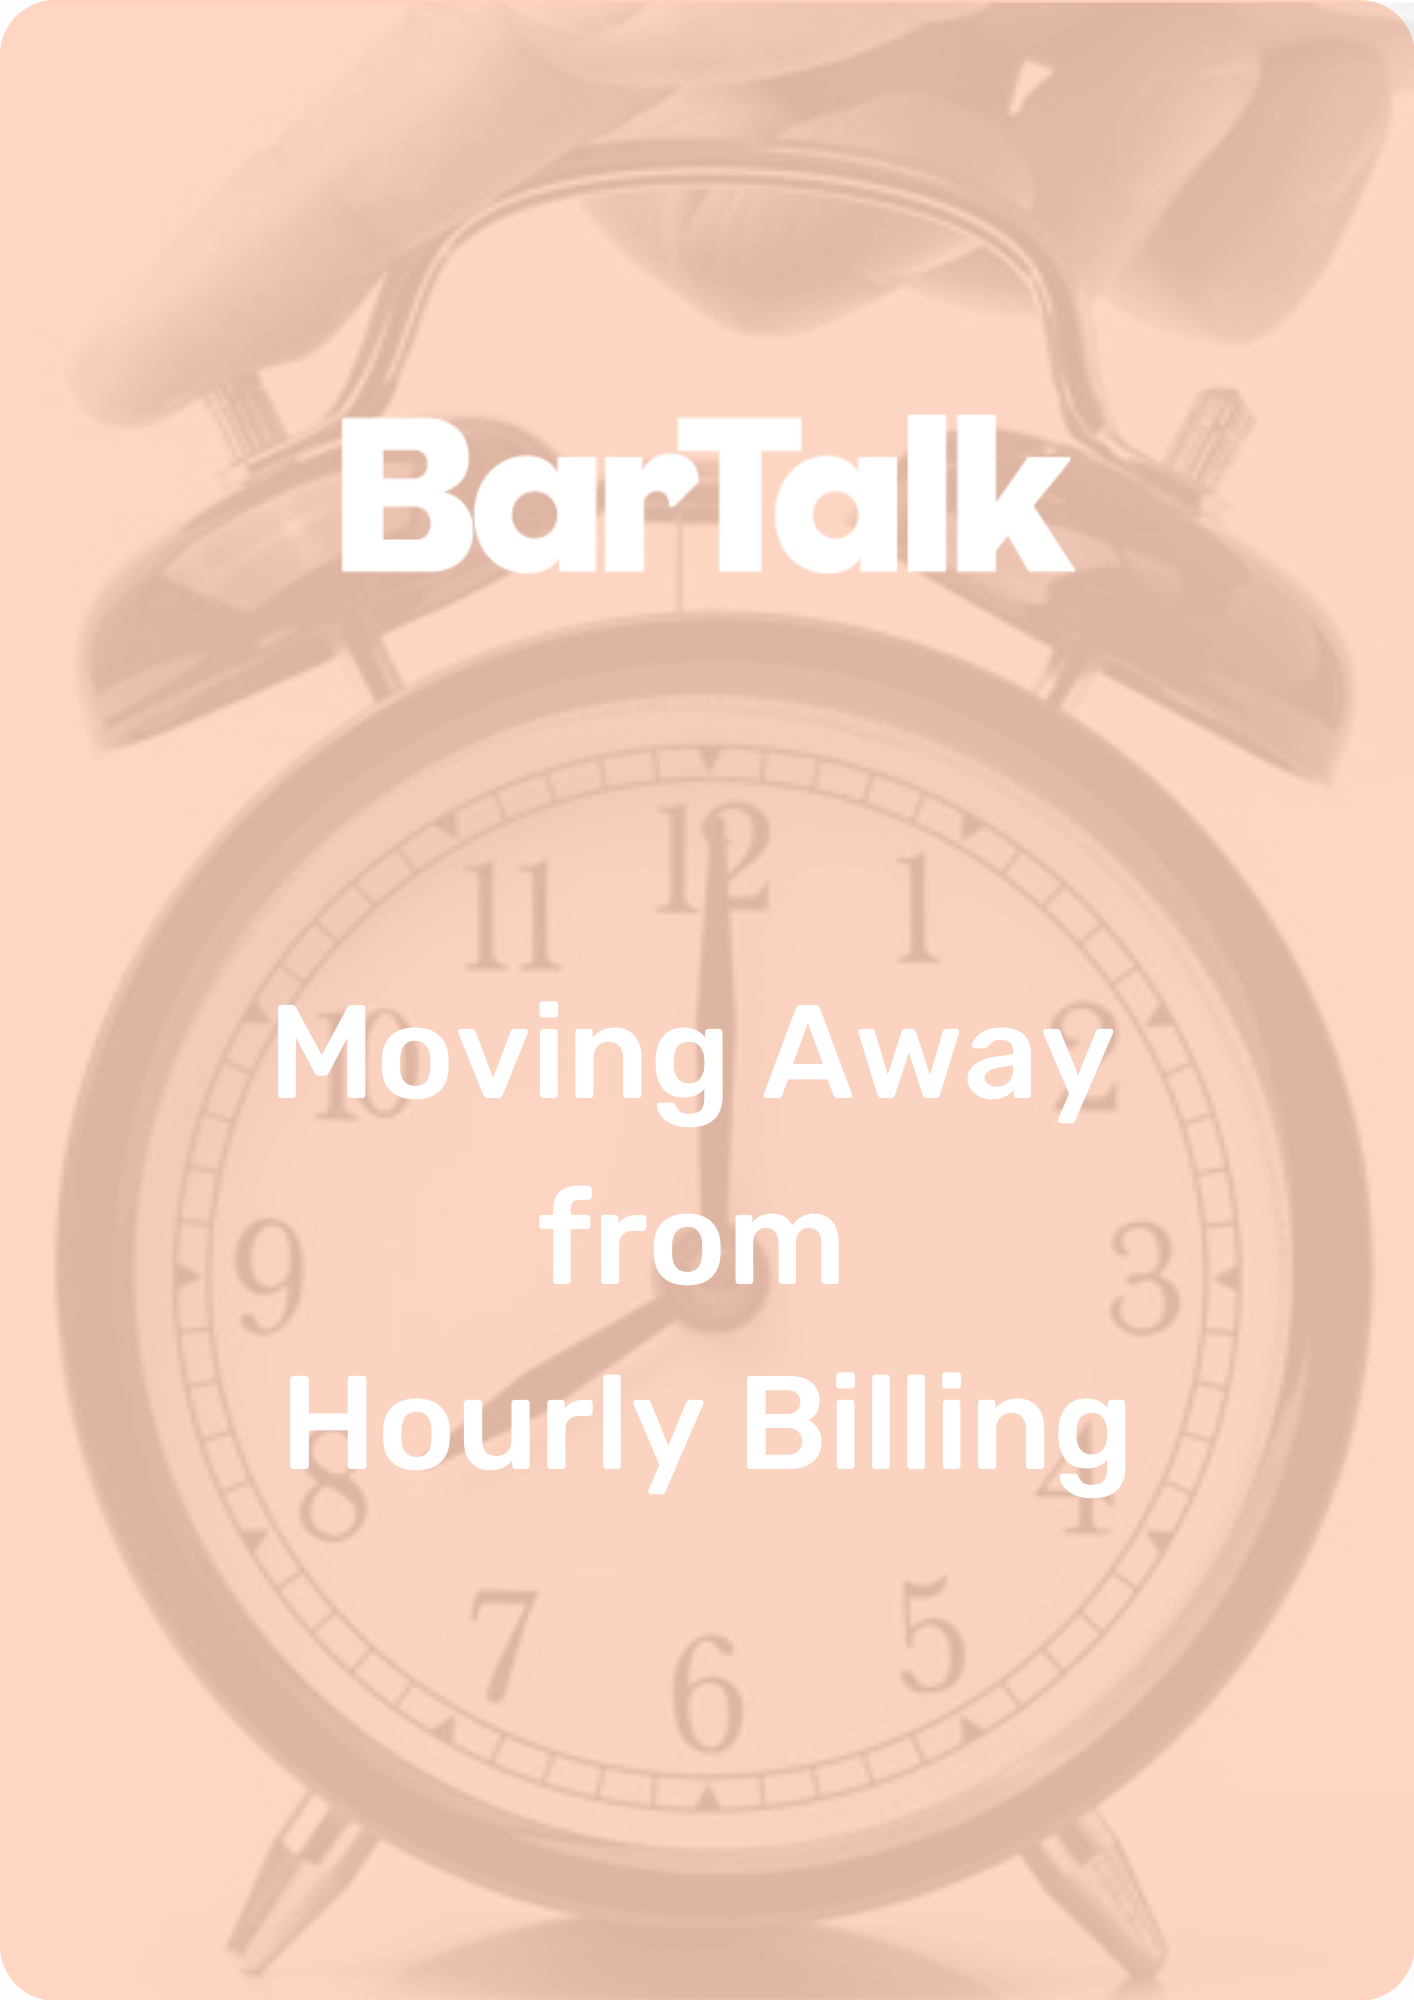 Bartalk_moving_away-from-the-billable-hour